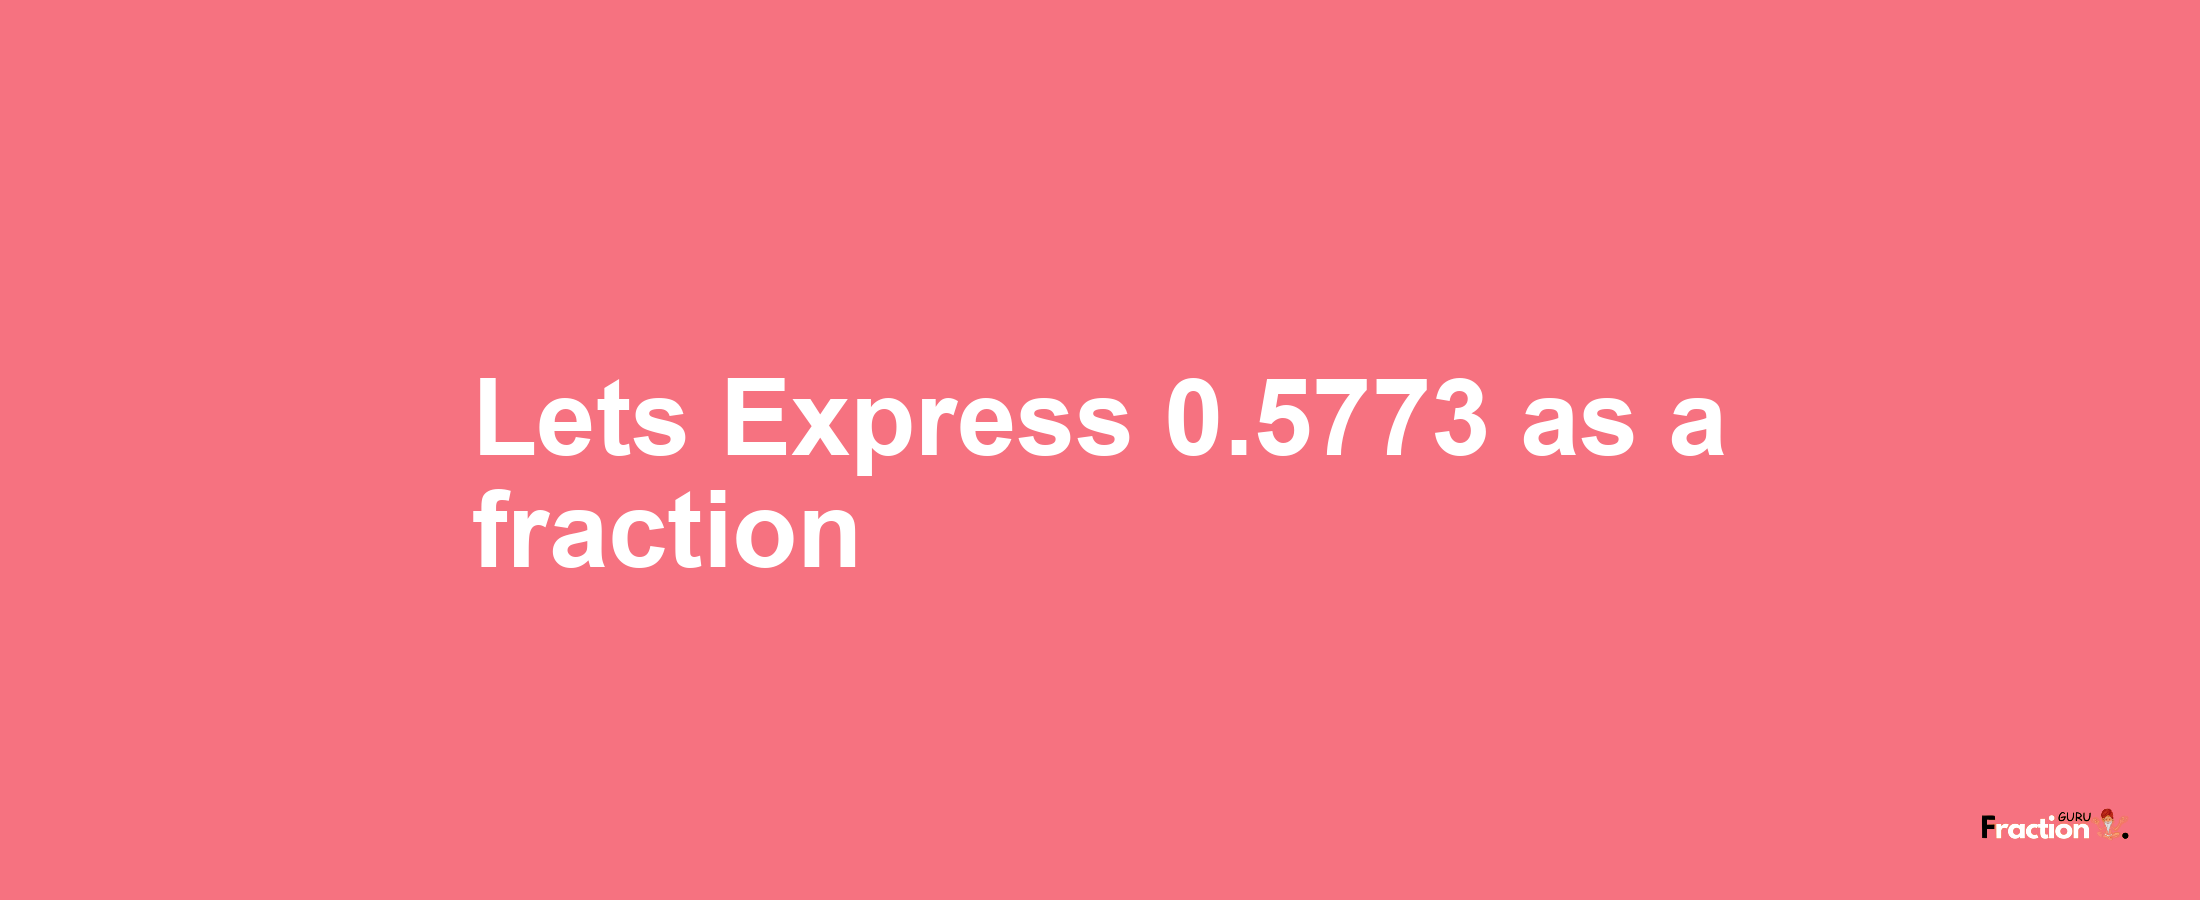 Lets Express 0.5773 as afraction